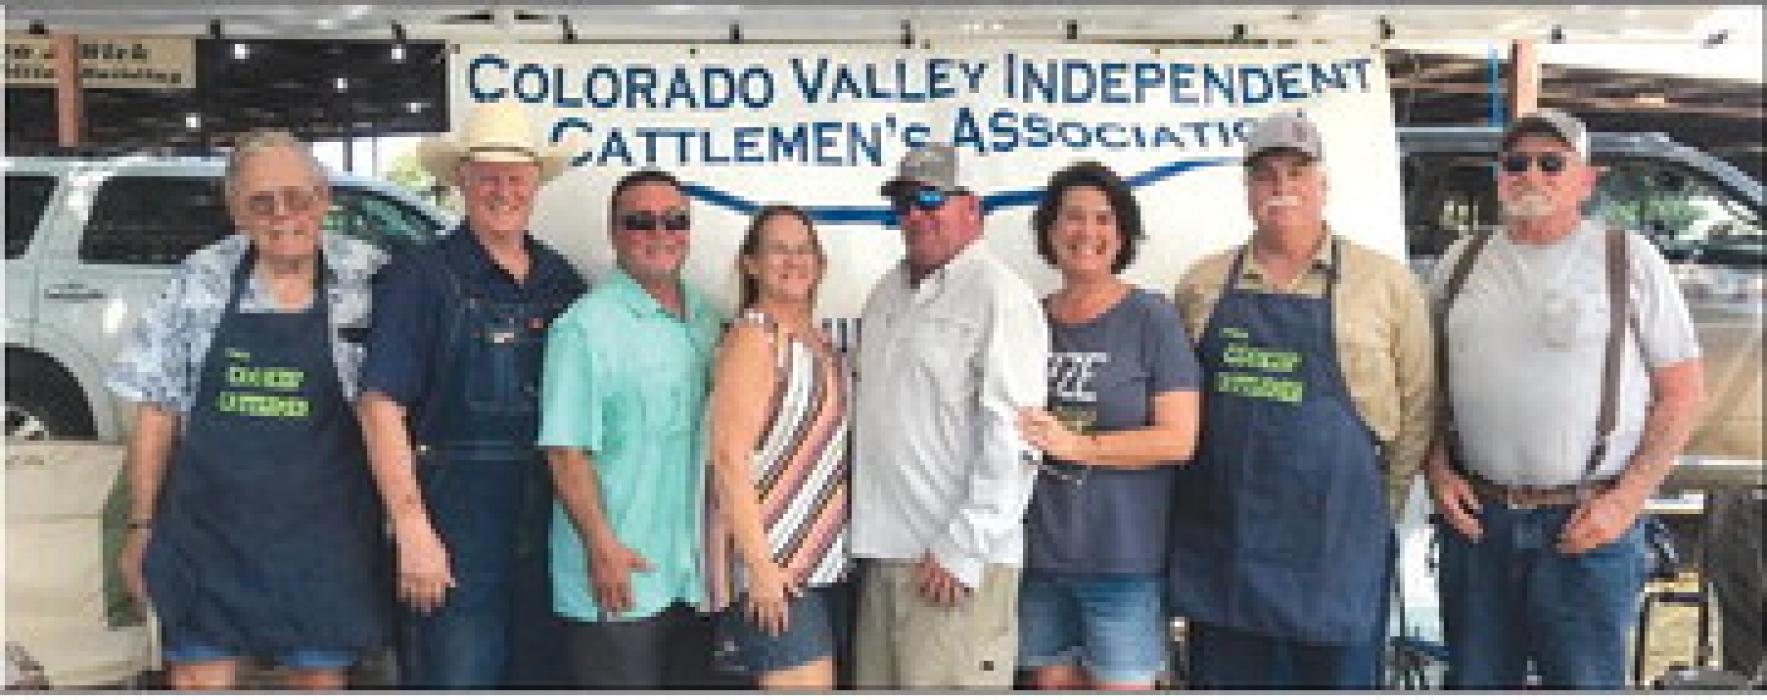 The Colorado Valley Independent Cattlemen’s Association (CVICA) prepared hamburgers for the Fayette County Fair Livestock Show and Sale on Aug. 26, at the Fayette County Fairgrounds. Ron Denham coordinated the event and set up the booth. The following members prepared and served the hamburgers with condiments: (pictured from left) Dr. James Tiemann, DVM, Steve Janda, Ron Denham, Loretta Denham, Bill Sickon, Tara Sickon, Jeff Gau and David Karisch.